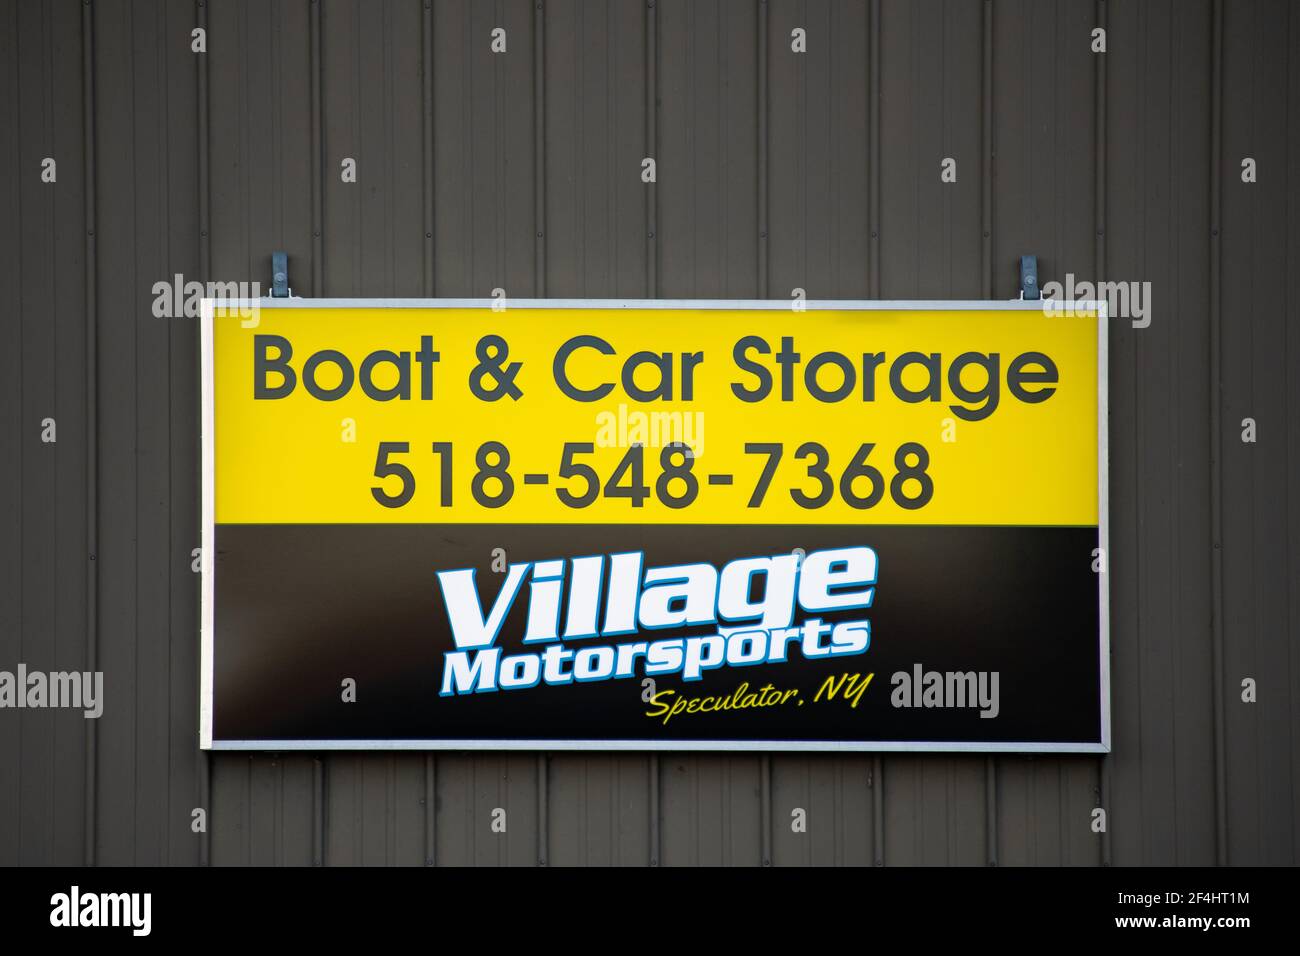 A sign for Village Motorsports Boat & Car Storage building in Speculator, NY USA Stock Photo